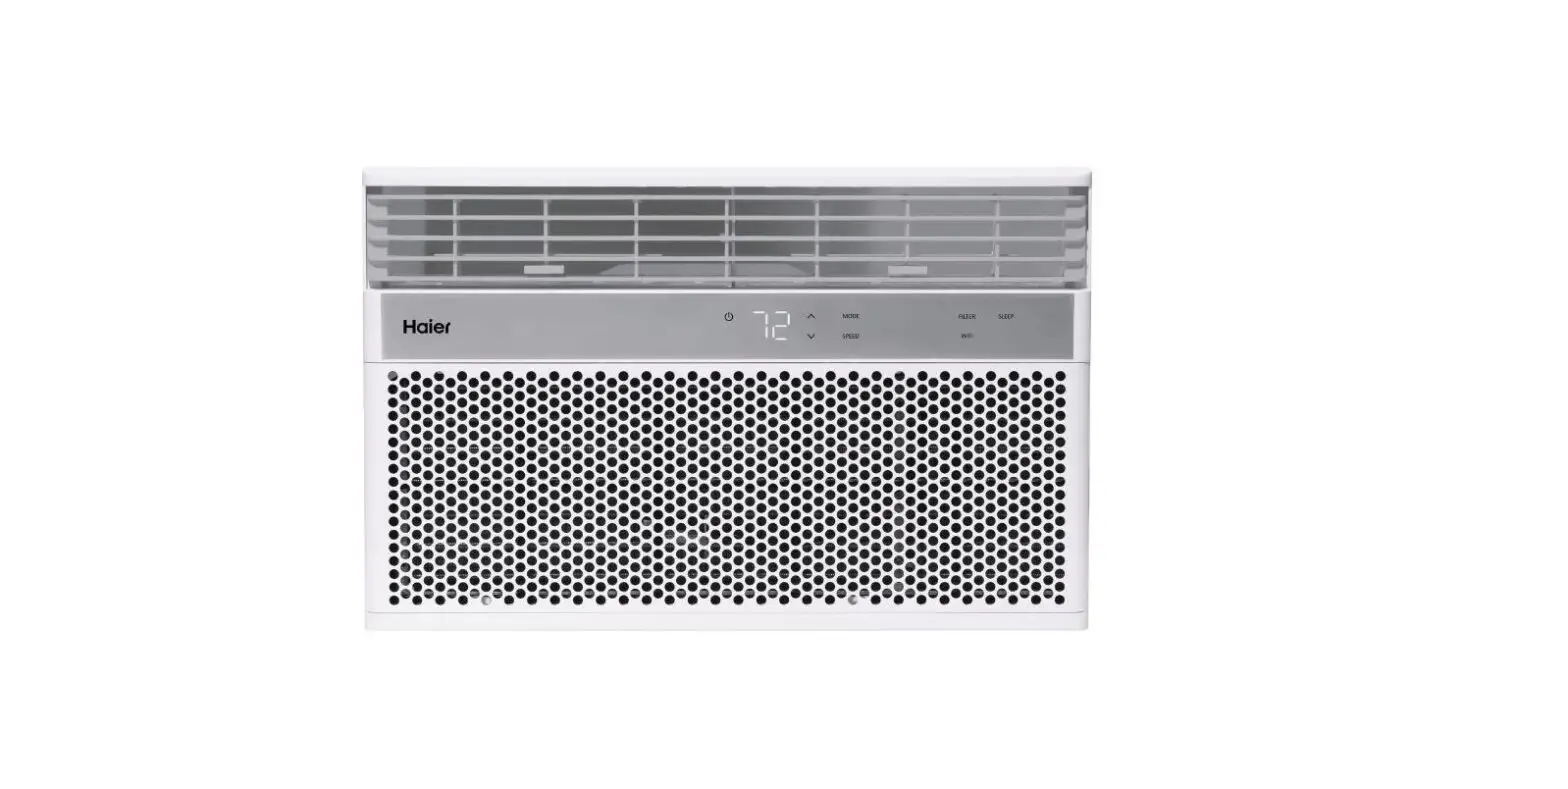 Haier QHNG08AA Room Air Conditioner Instruction Manual - Manualsee